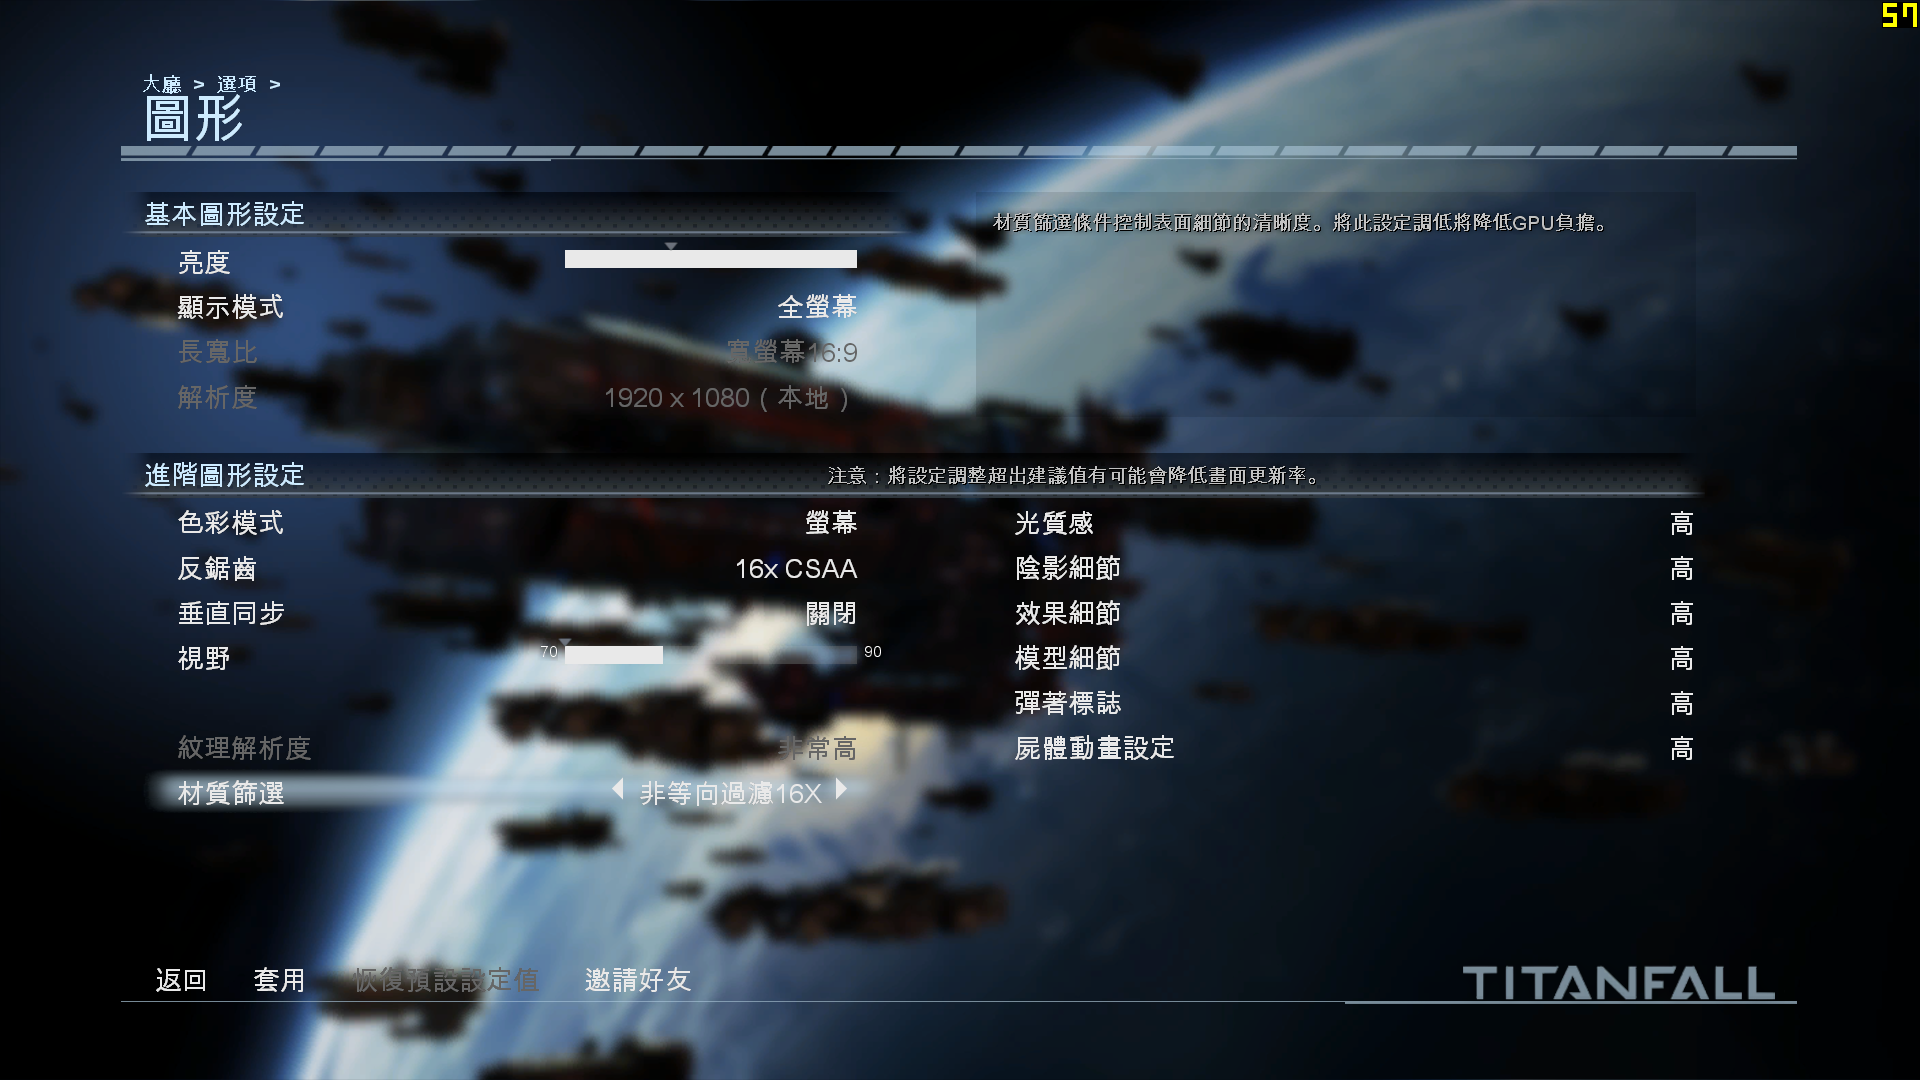 TitanFall 2014-03-21 22-52-18-24.png